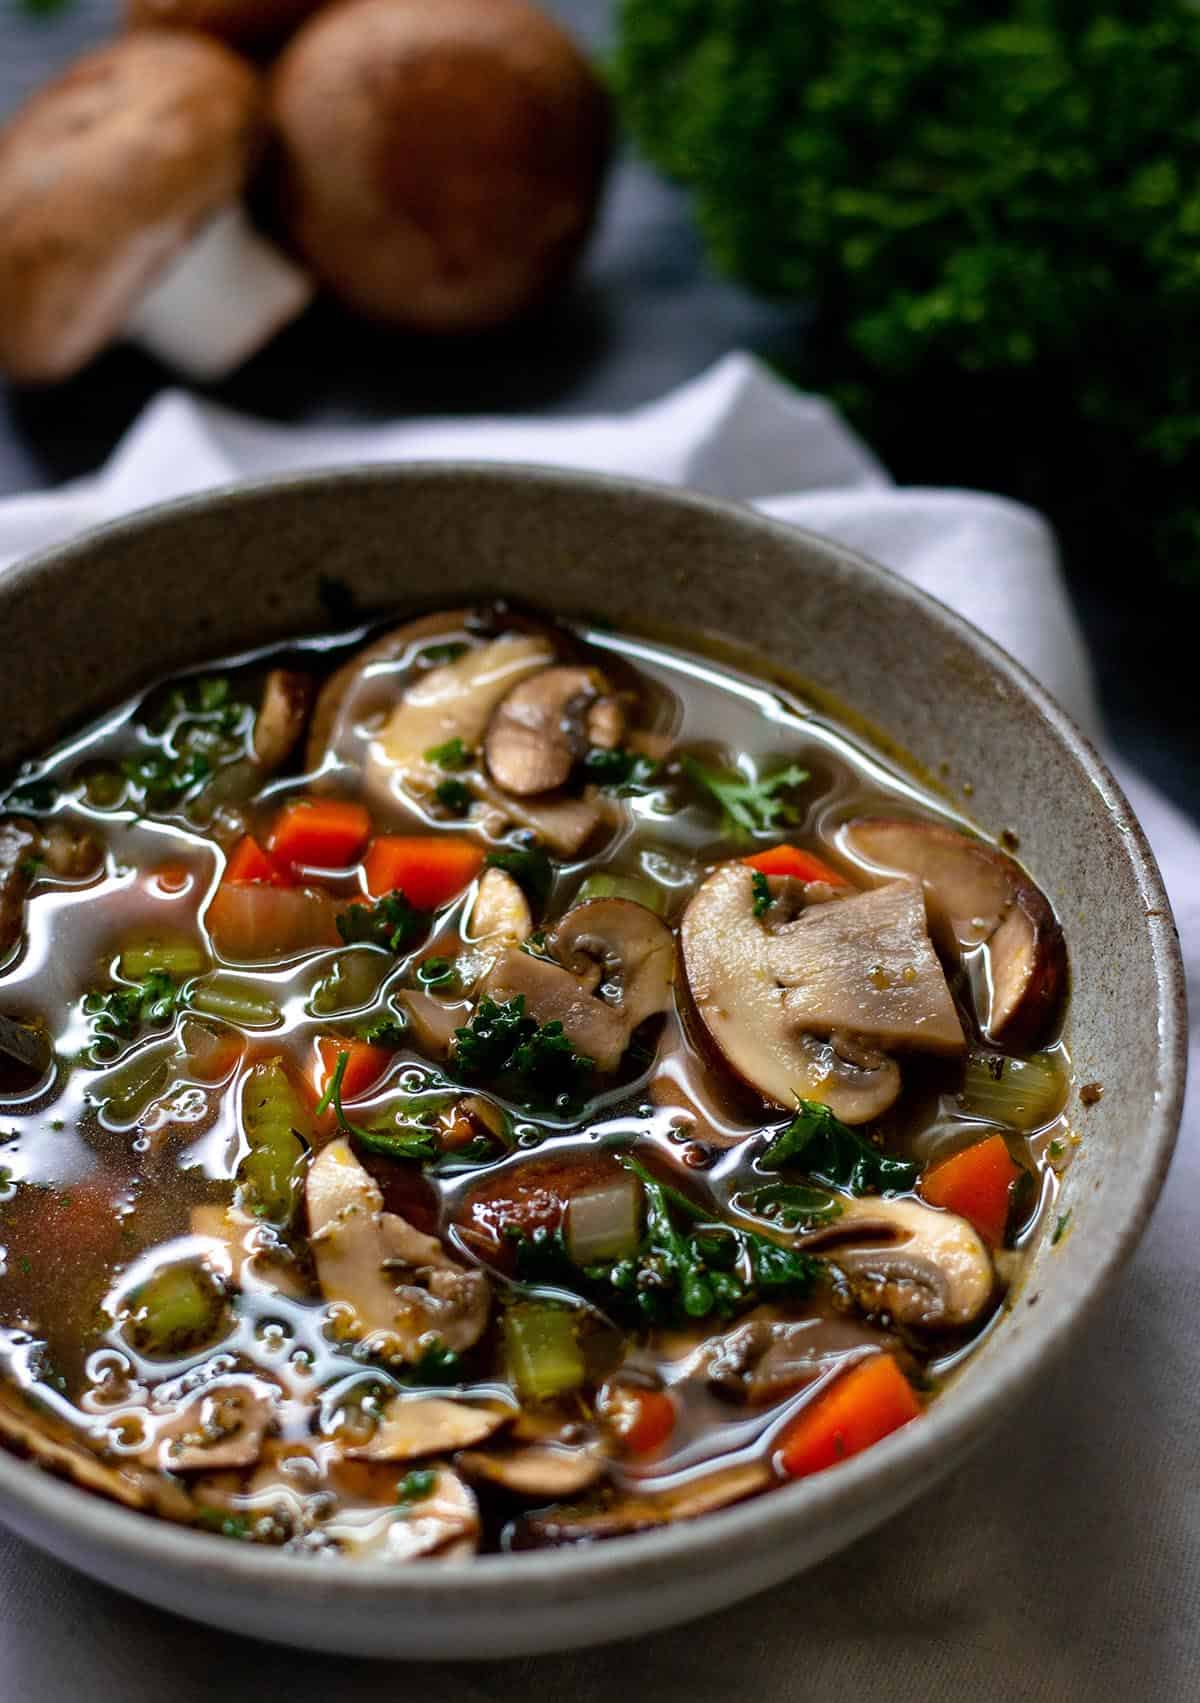 A bowl of soup with mushrooms, carrots, celery and beef broth.